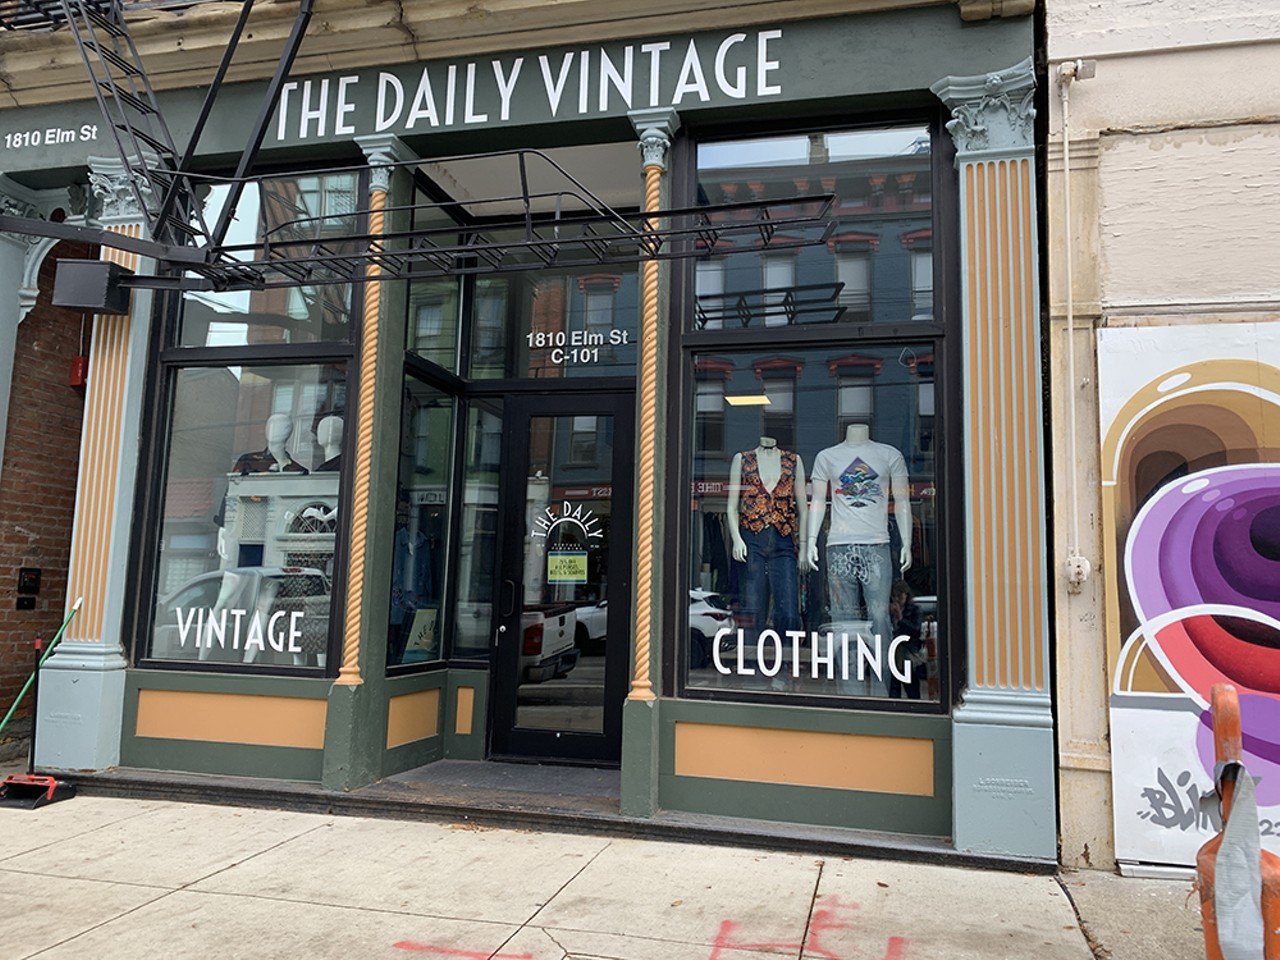 The Daily Vintage
1810 Elm St., Over-the-Rhine
Reduce, reuse and recycle with a splash of time travel at the Daily Vintage. The store’s stock is constantly updated with stylish vintage finds, including retro Cincinnati sports apparel like classic Bengals, Reds and UC sweatshirts and shirts, along with fantastic ’80s and ’90s pop culture throwbacks. It also has timeless hats, purses, accessories and clothes for every season that are both fashionable and sustainable. Check out its Instagram page for the most up-to-date options, or just make an impromptu stop in the store — you never know what you’ll find.